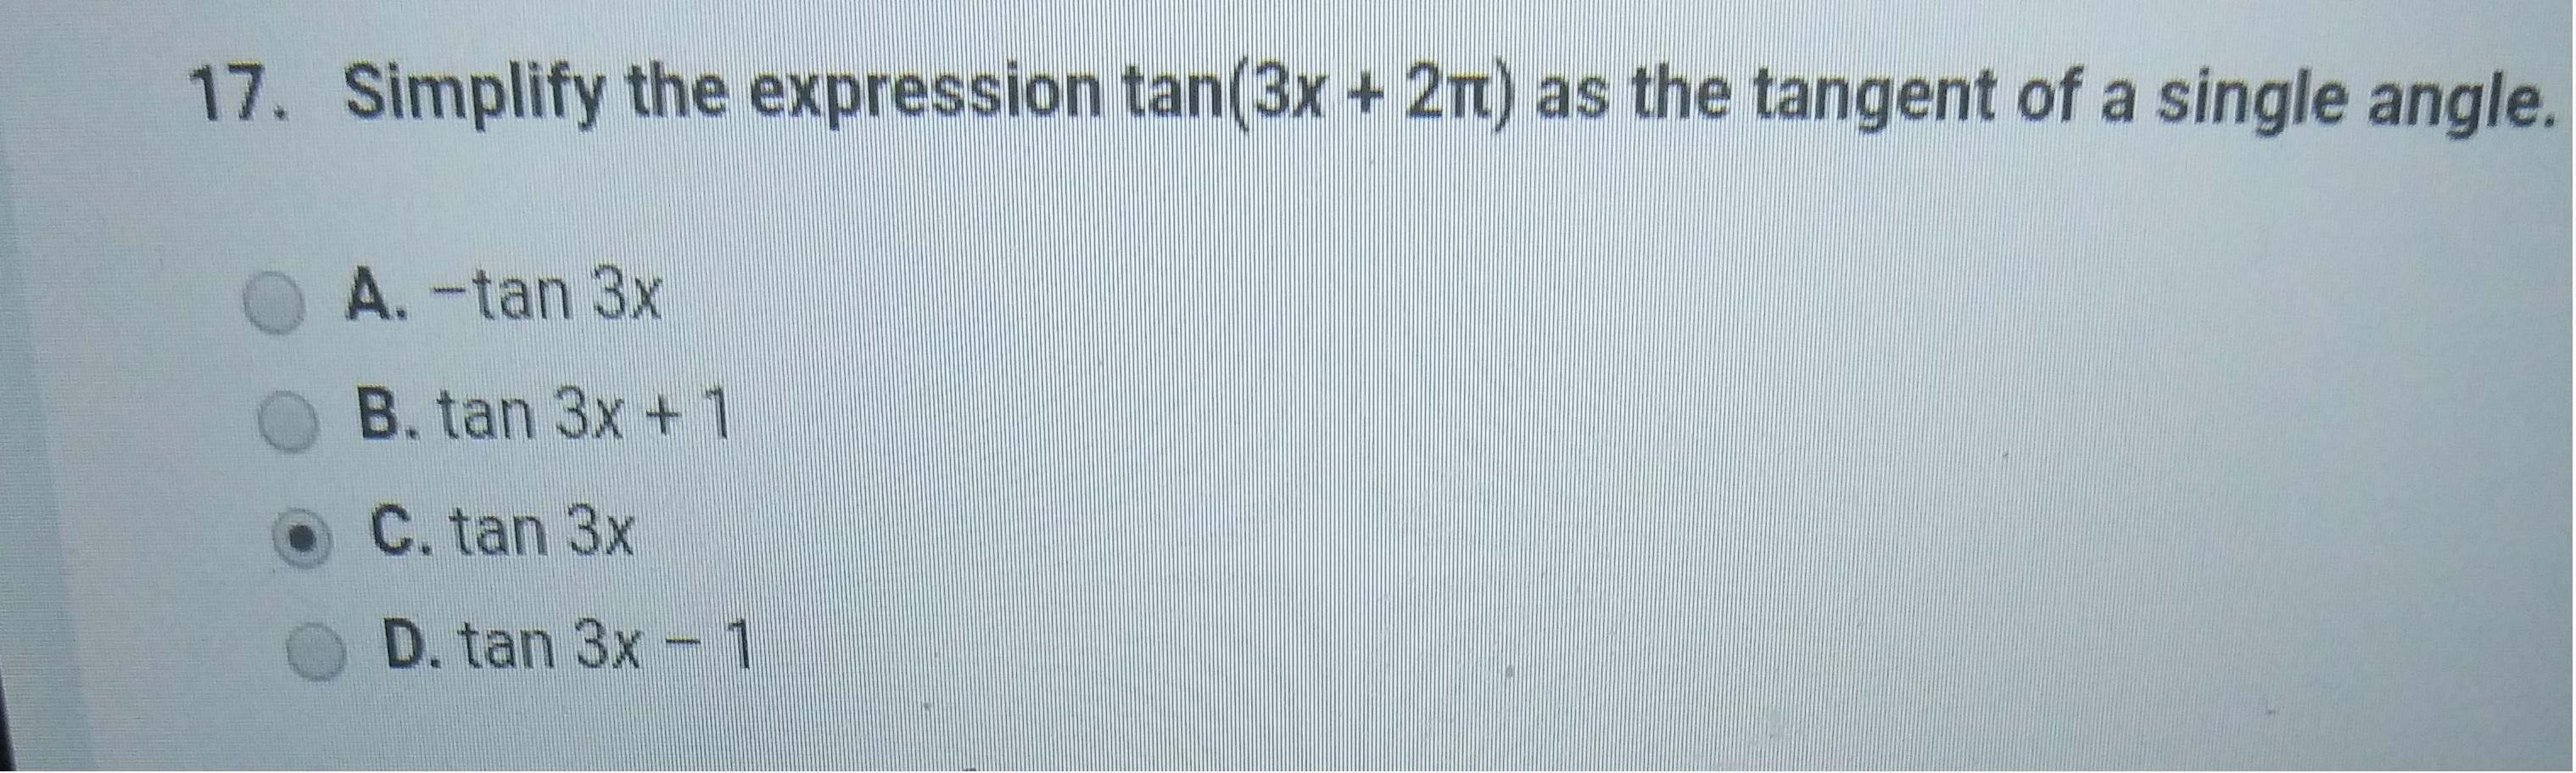 Simplify The Expression Tan (3 X+ 2pi) As The Tangent Of A Single Angle